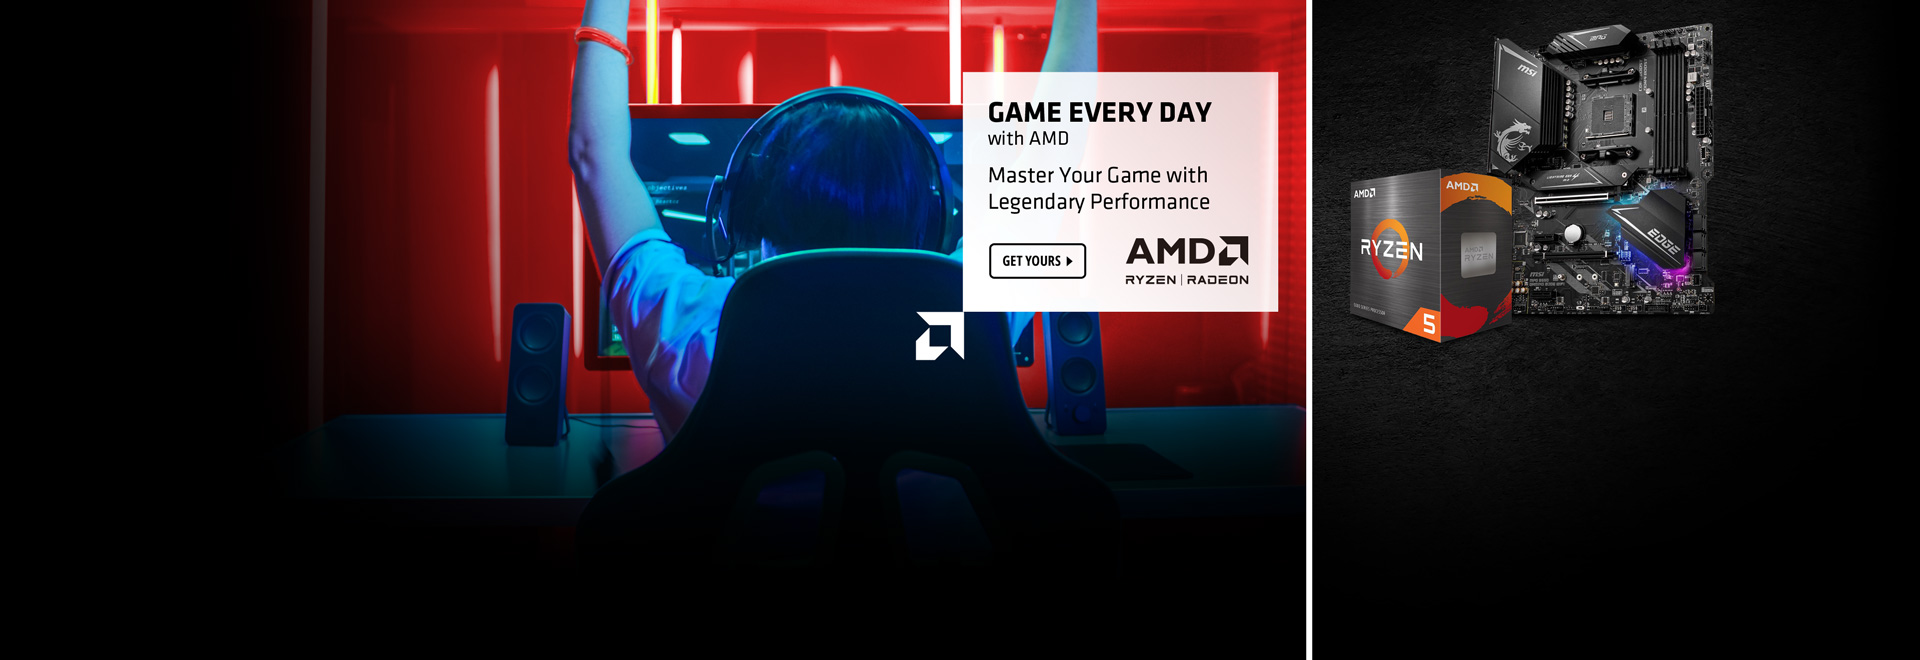 AMD Game Every Day